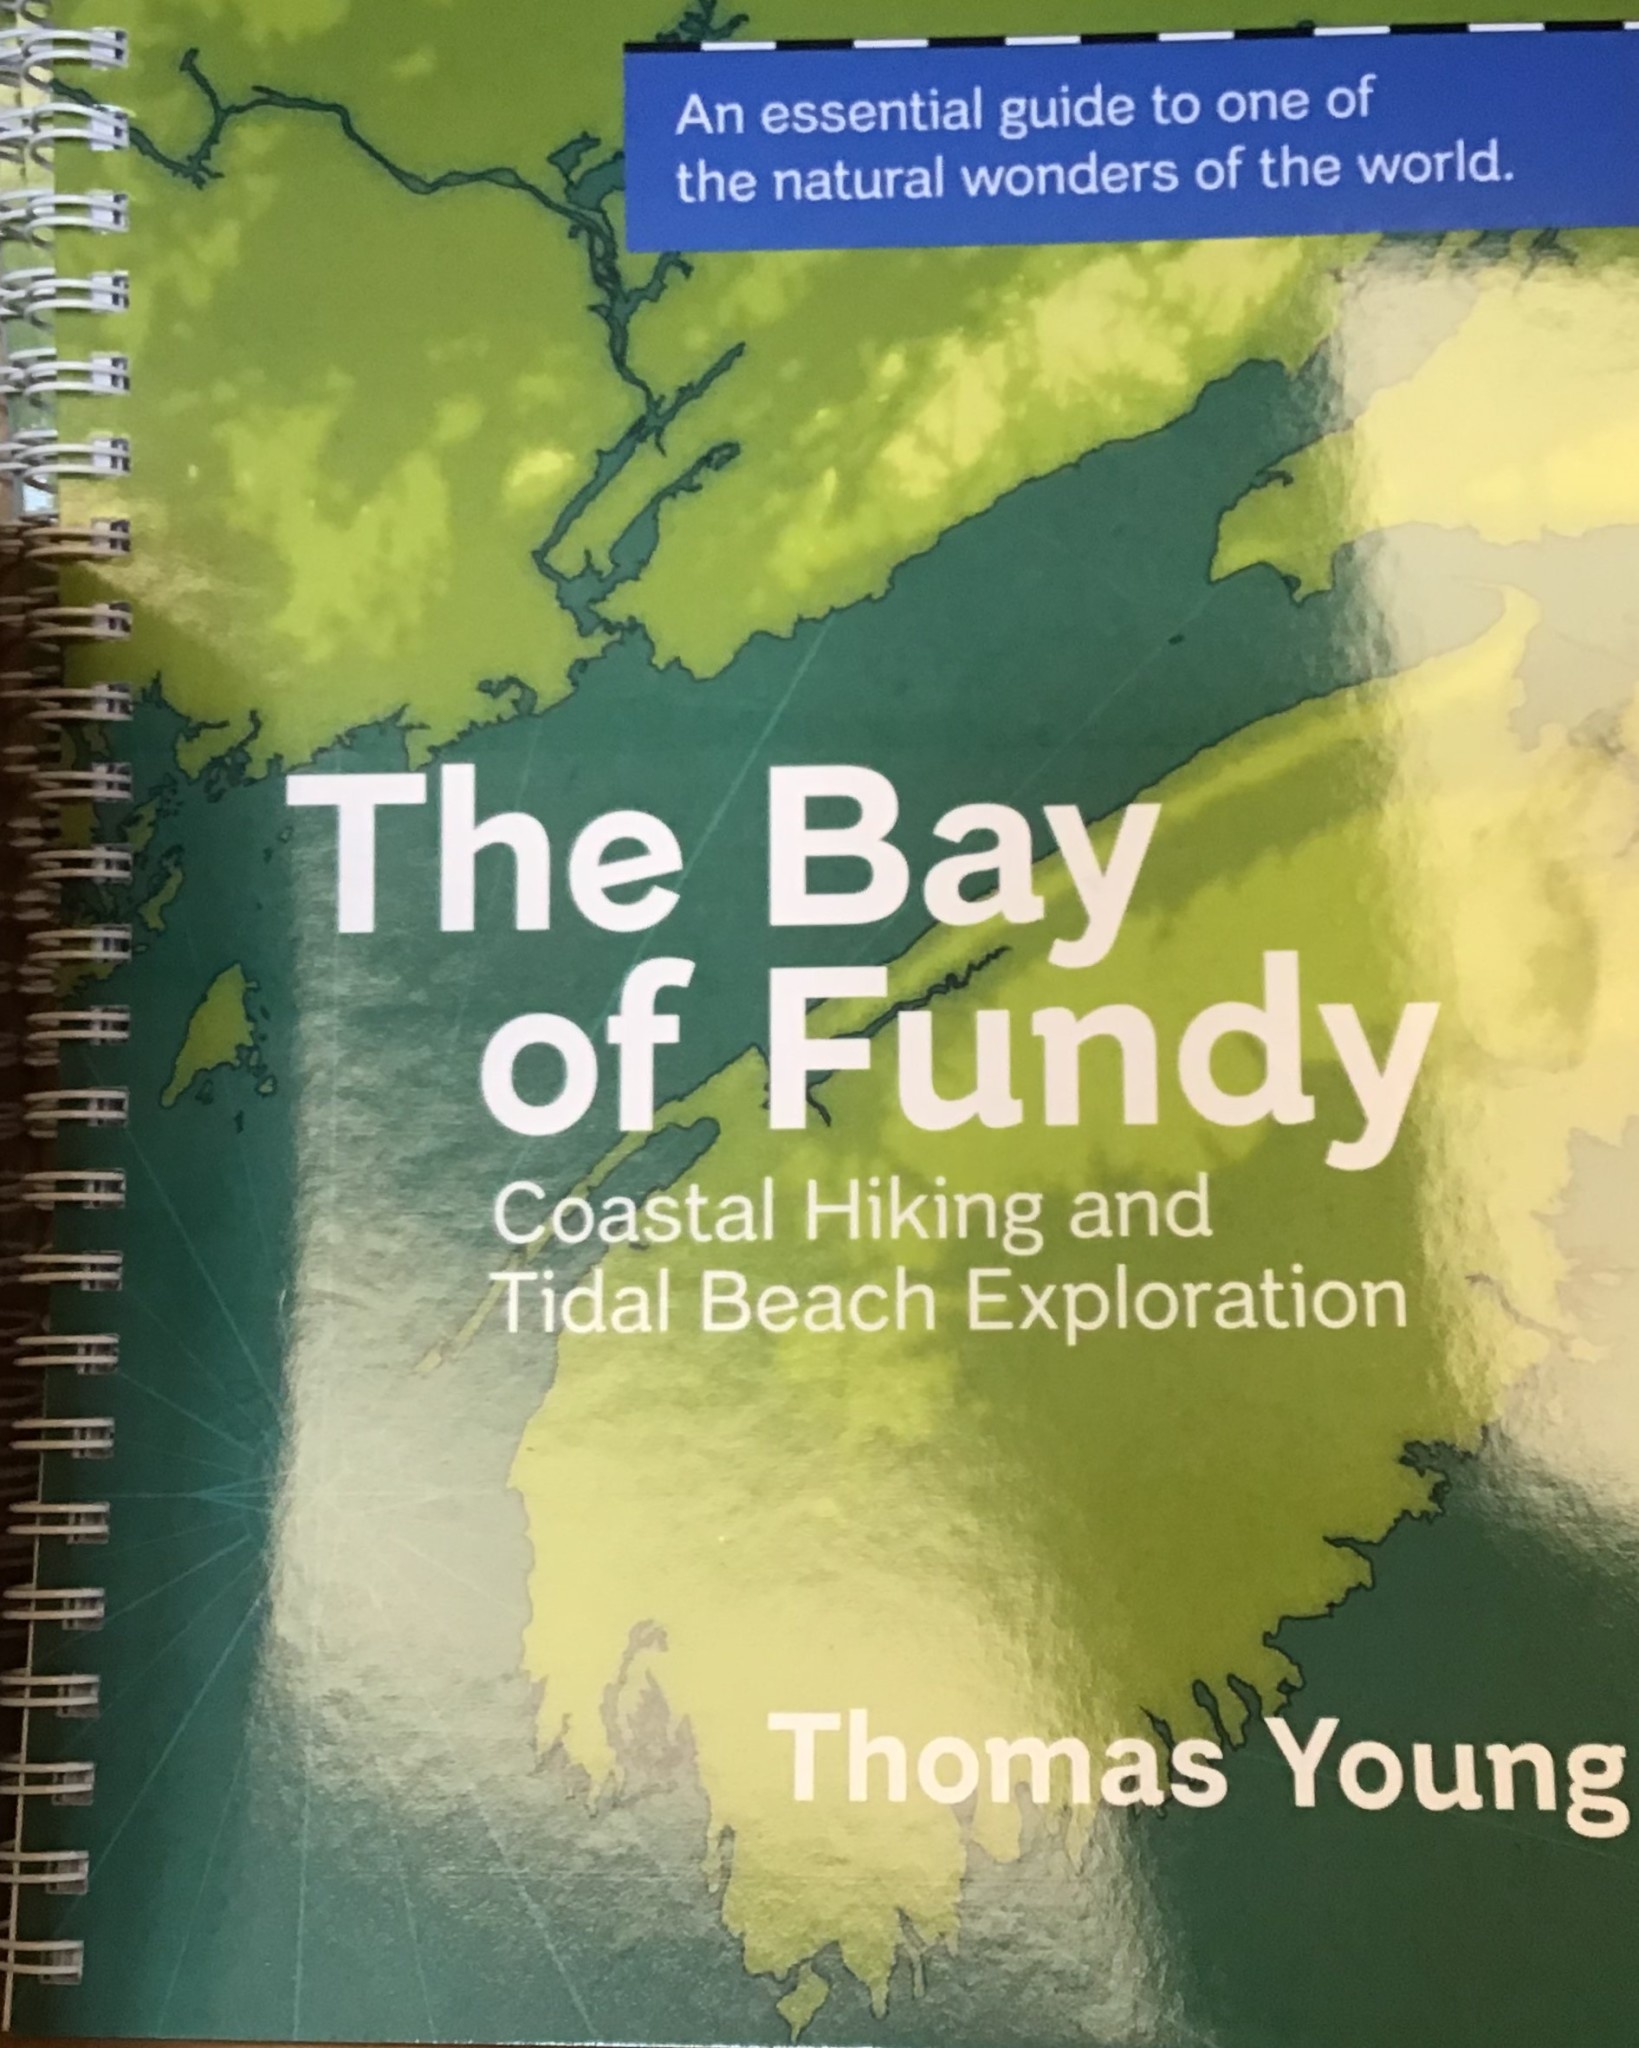 THE BAY OF FUNDY COASTAL HIKING AND BEACH EXPLORATION